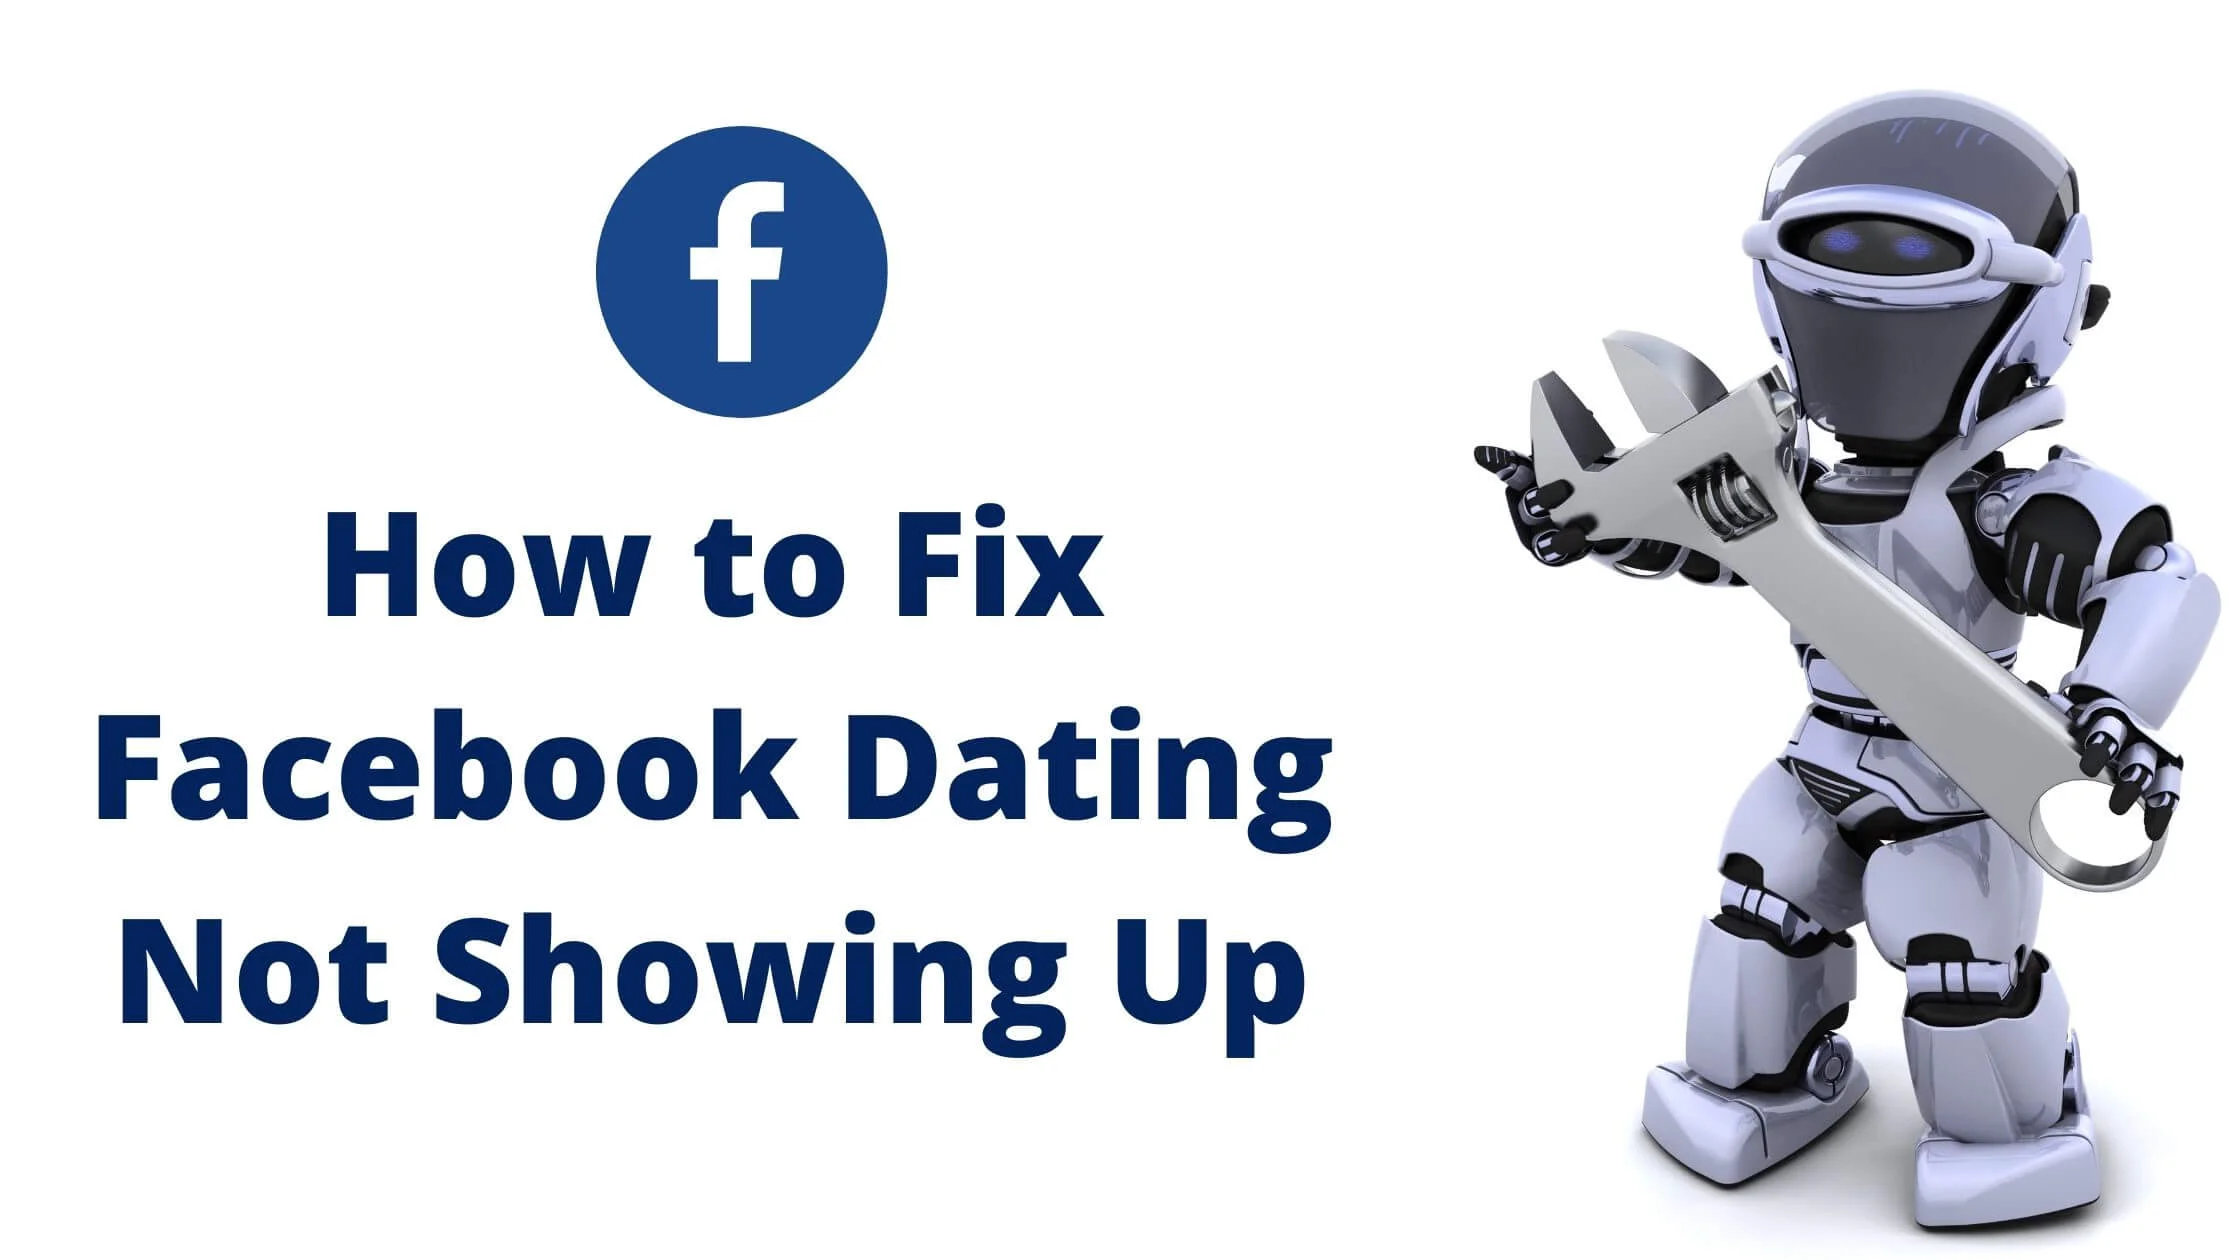 How to Fix Facebook Dating Not Showing Up